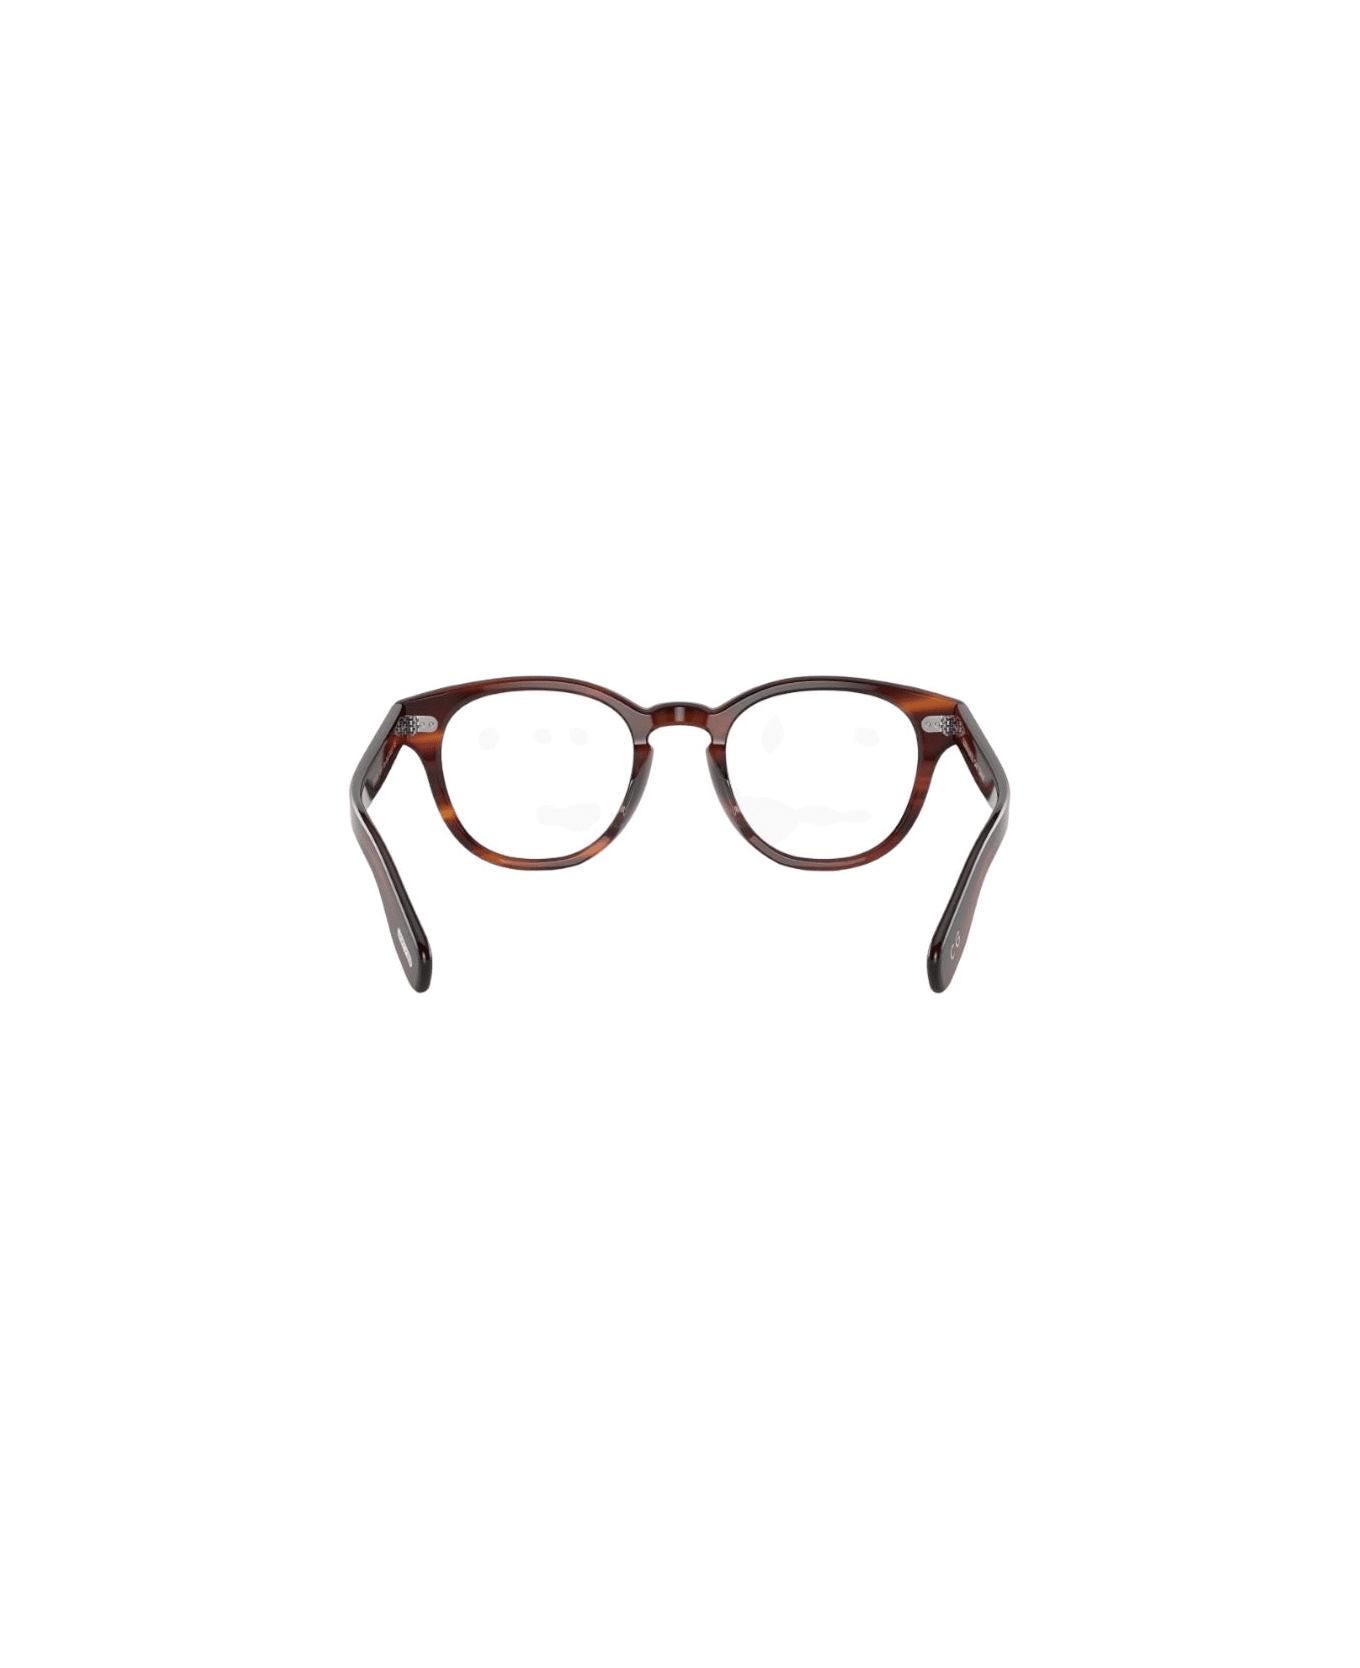 Oliver Peoples Cary Grant - Havana Glasses